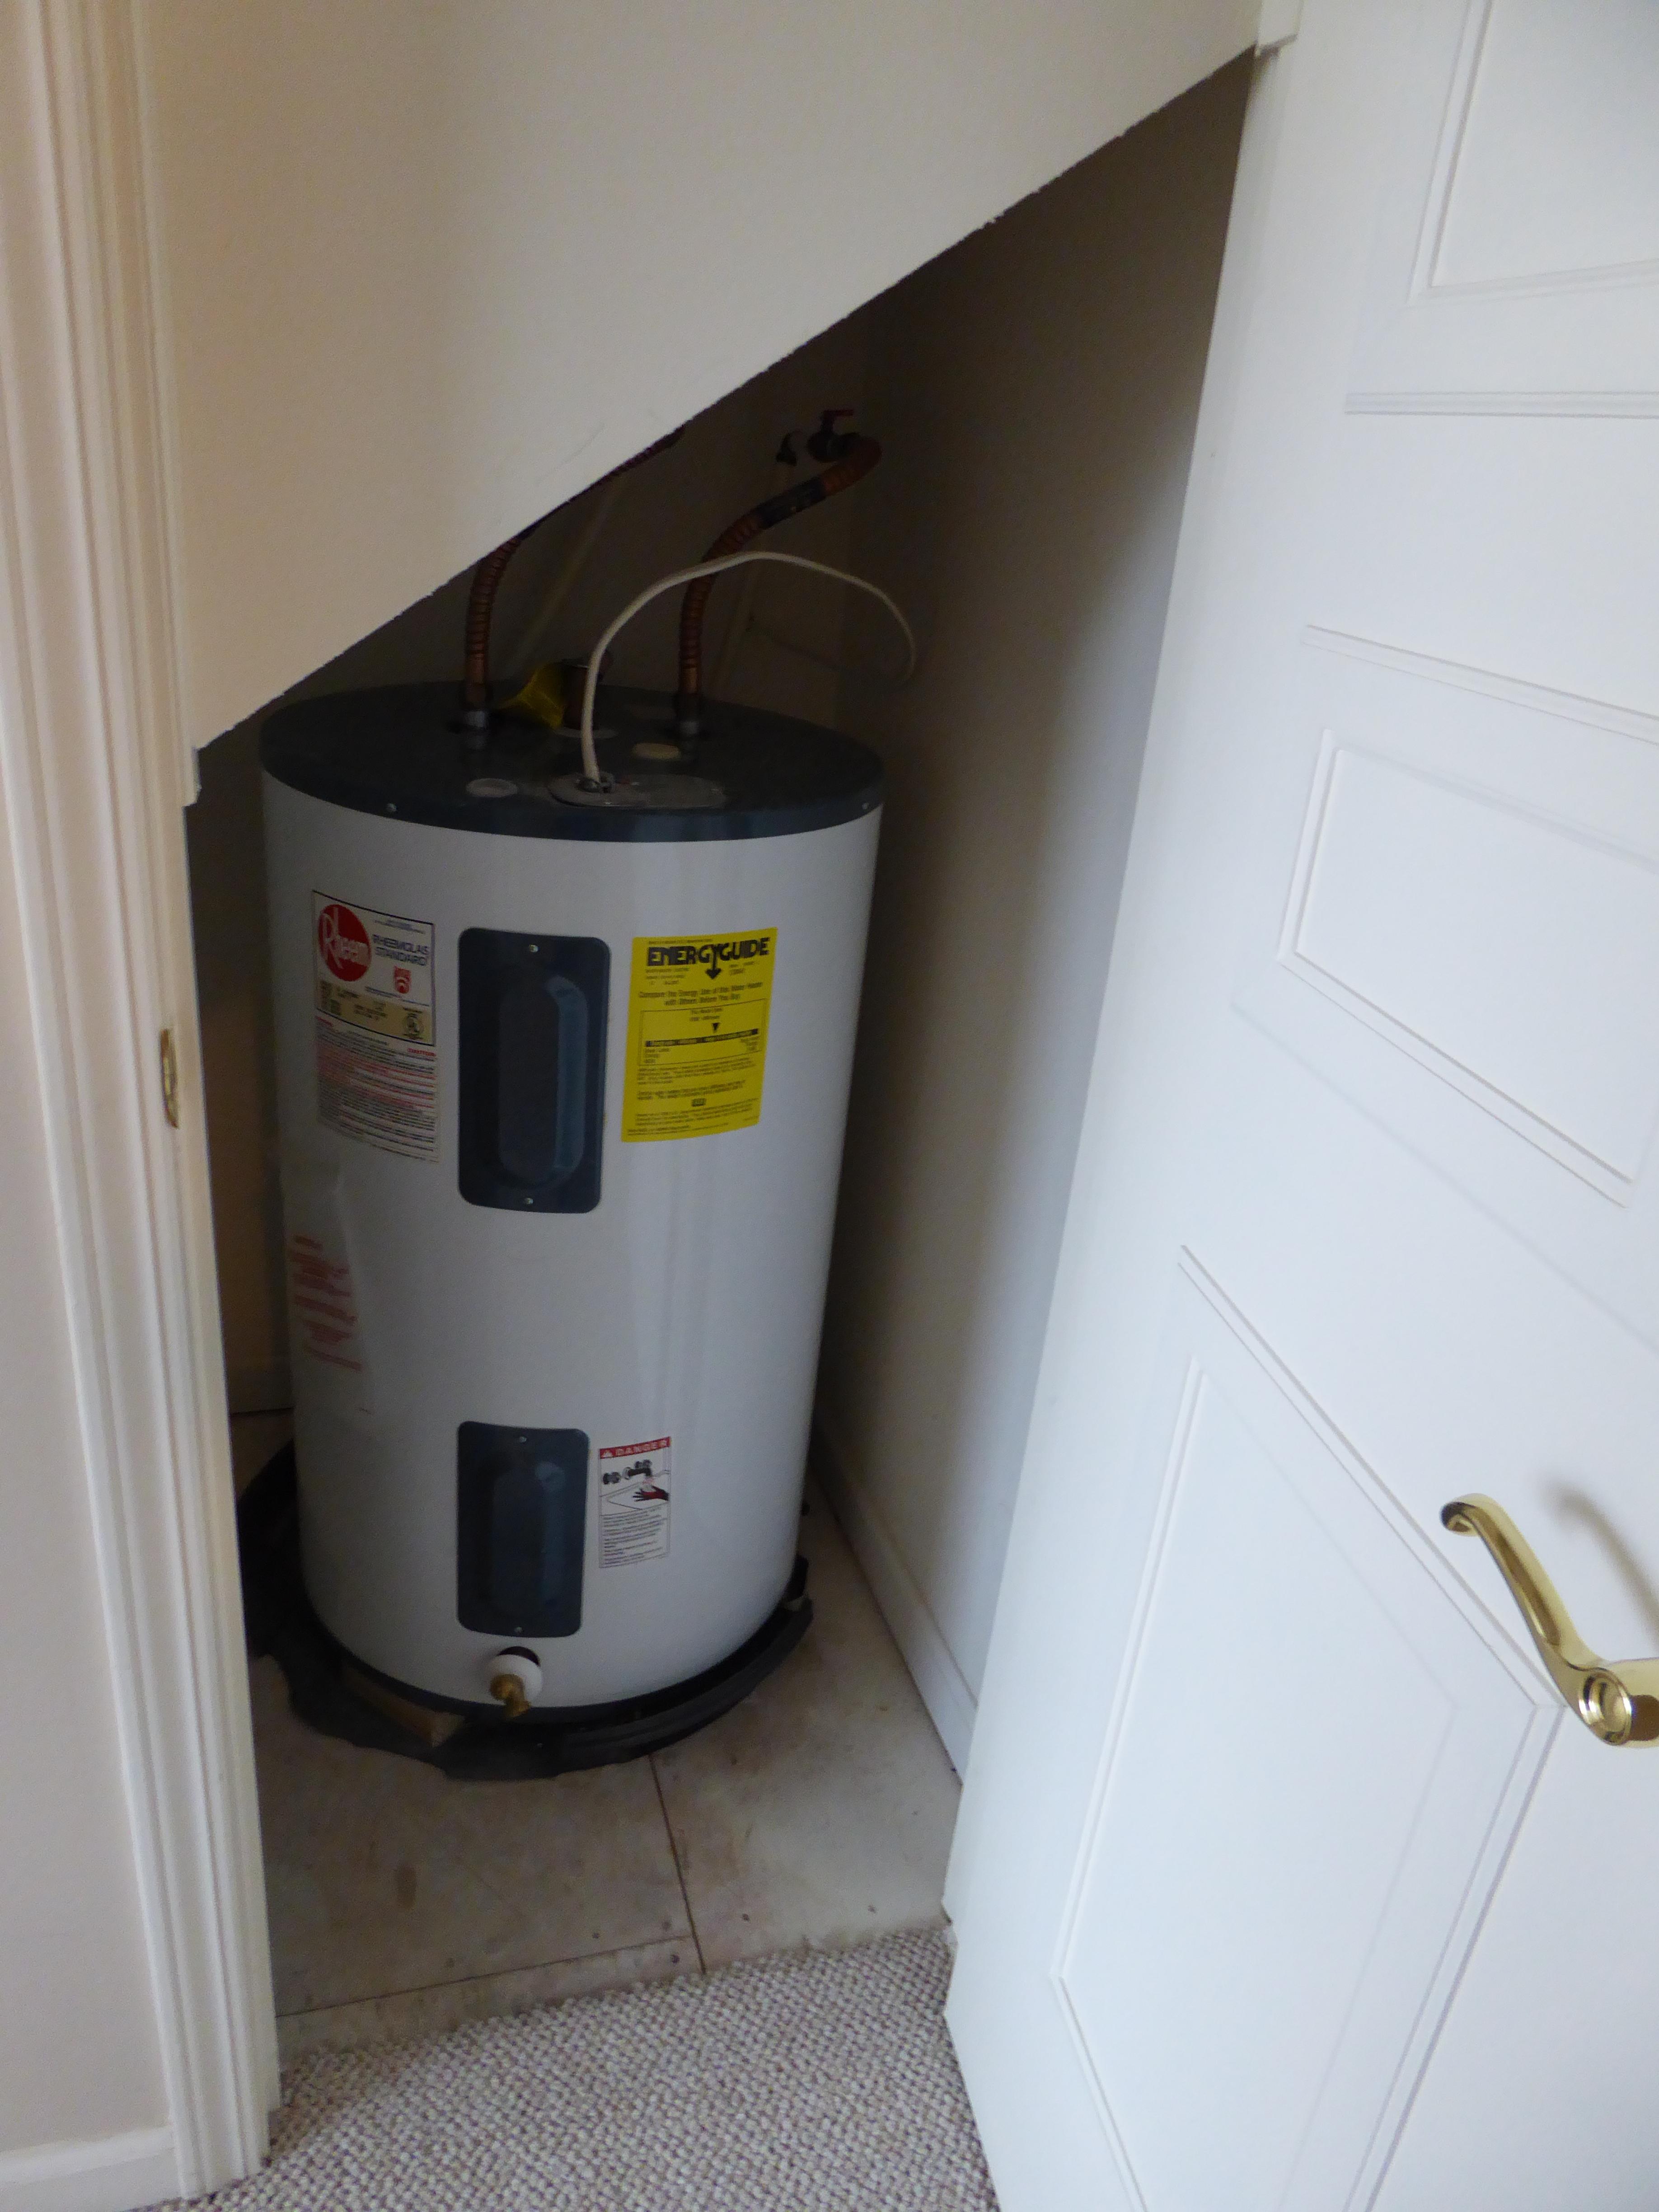 steps-to-take-if-your-water-heater-breaks-water-damage-cleanup-tips